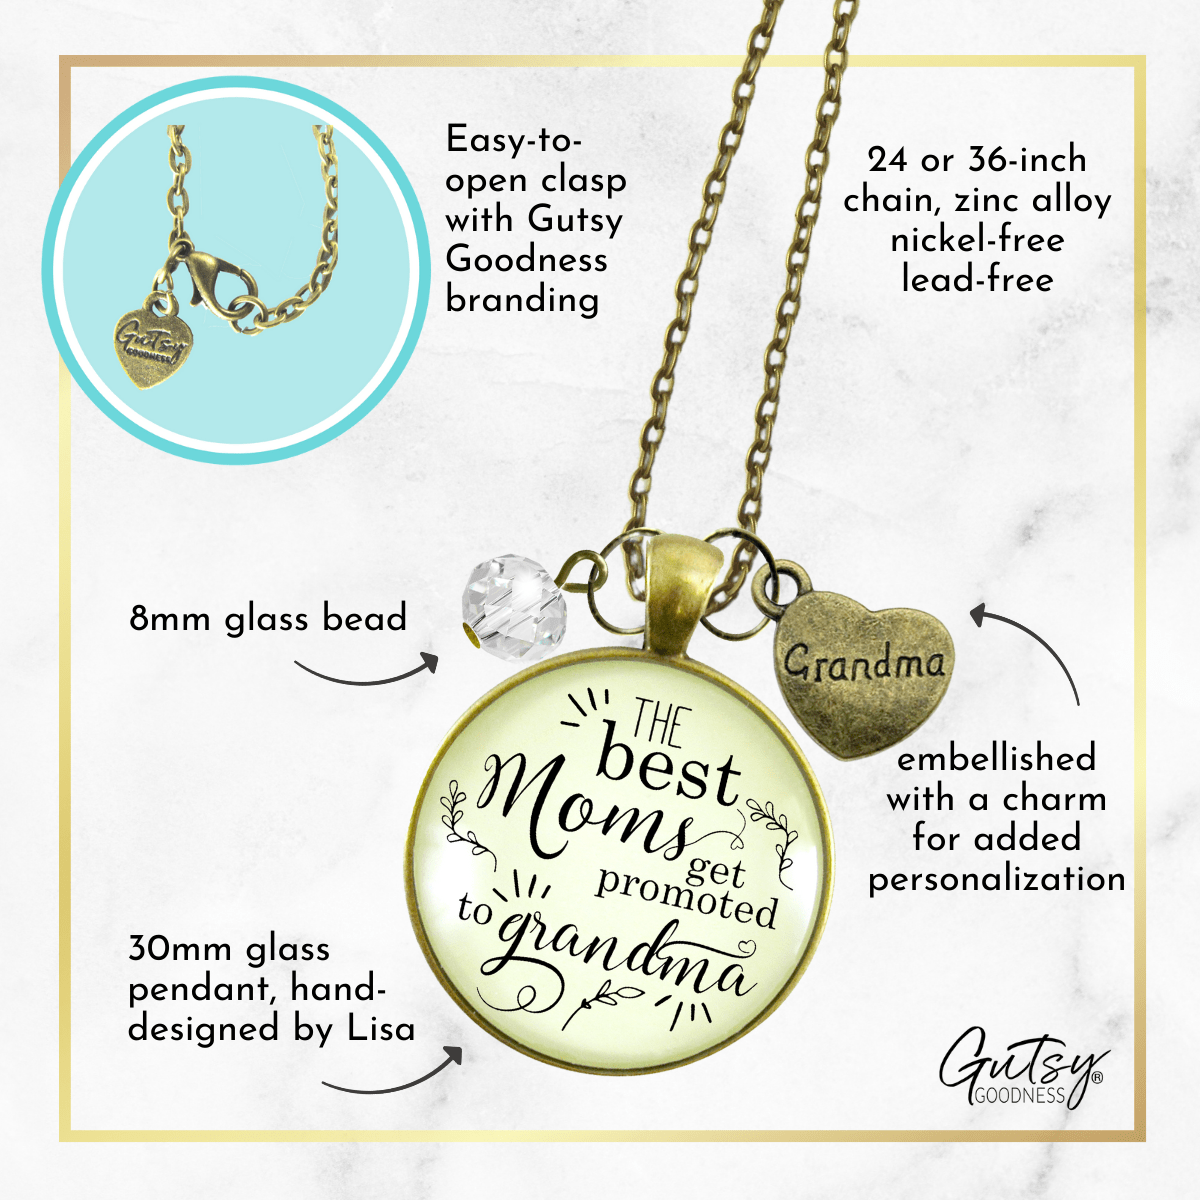 Gutsy Goodness New Grandma Necklace Best Moms Promoted Grandmother Jewelry Gift - Gutsy Goodness Handmade Jewelry;New Grandma Necklace Best Moms Promoted Grandmother Jewelry Gift - Gutsy Goodness Handmade Jewelry Gifts